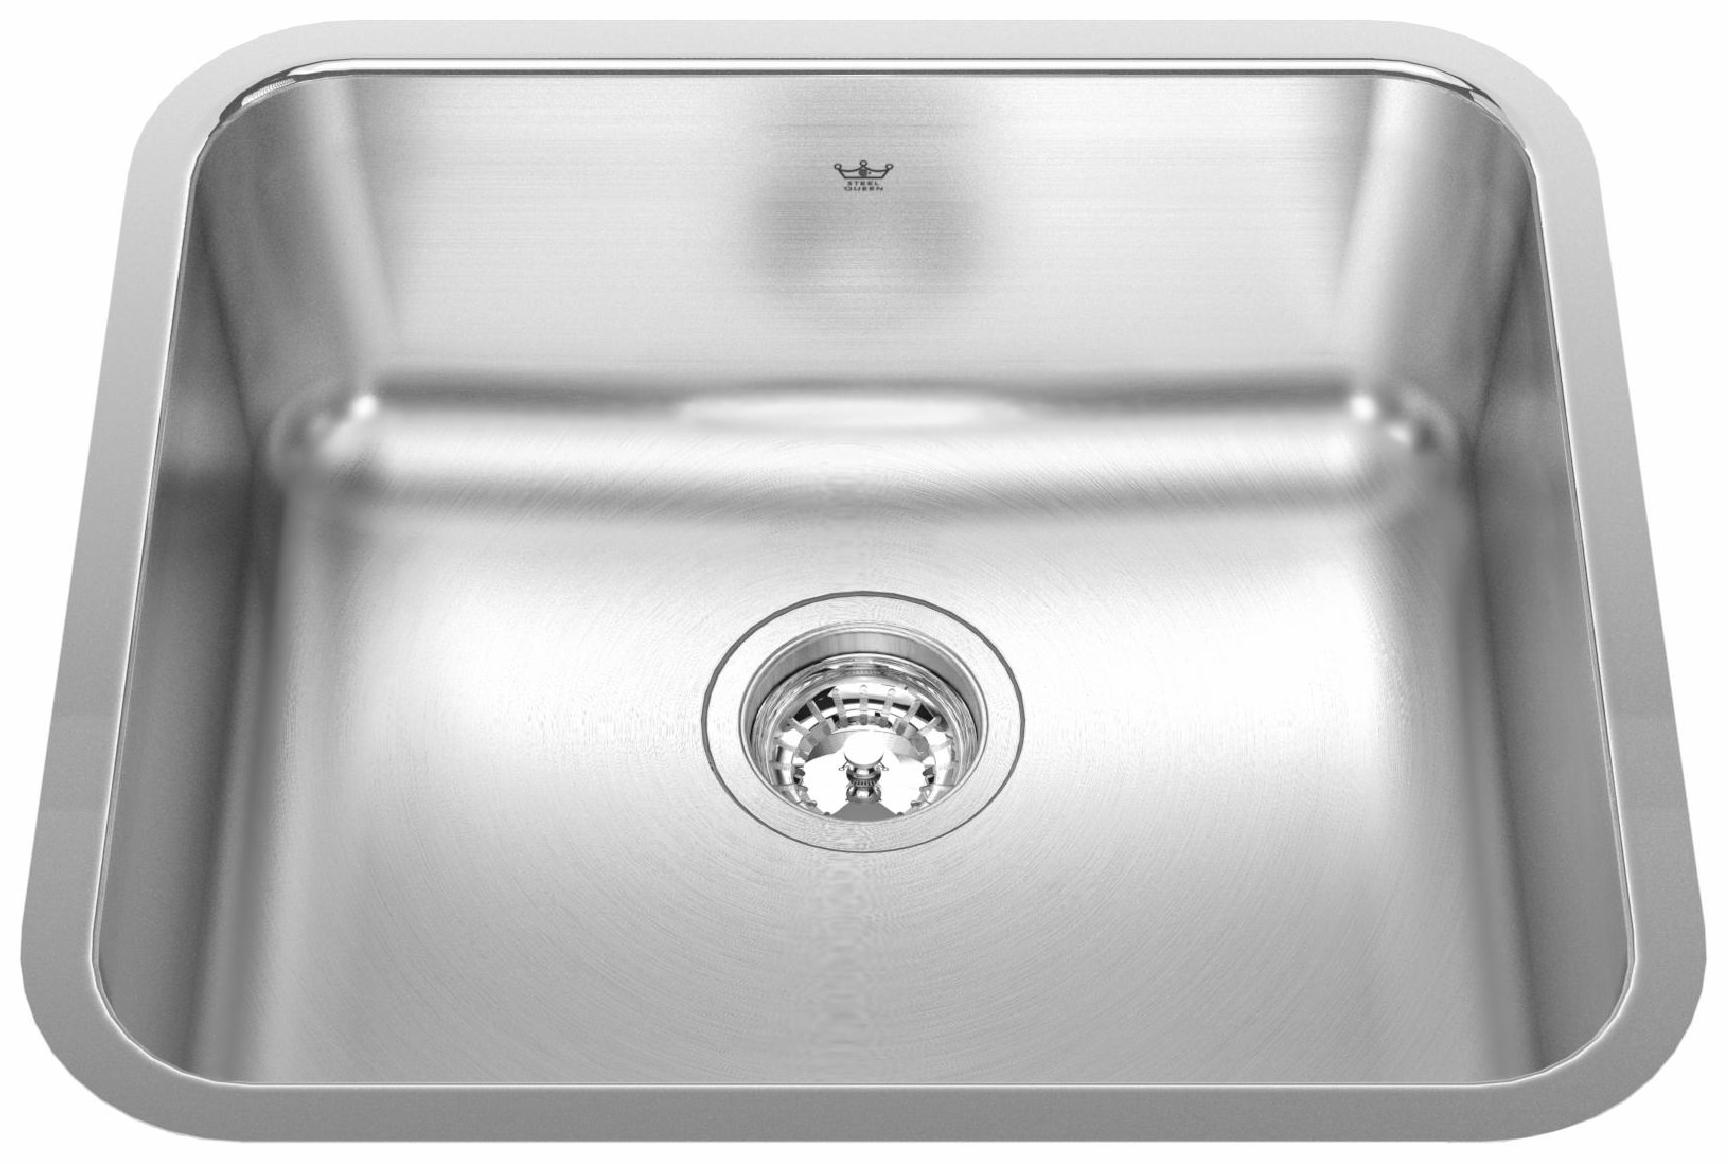 Kindred 1 Bowl Undermount Sink Qsua1820